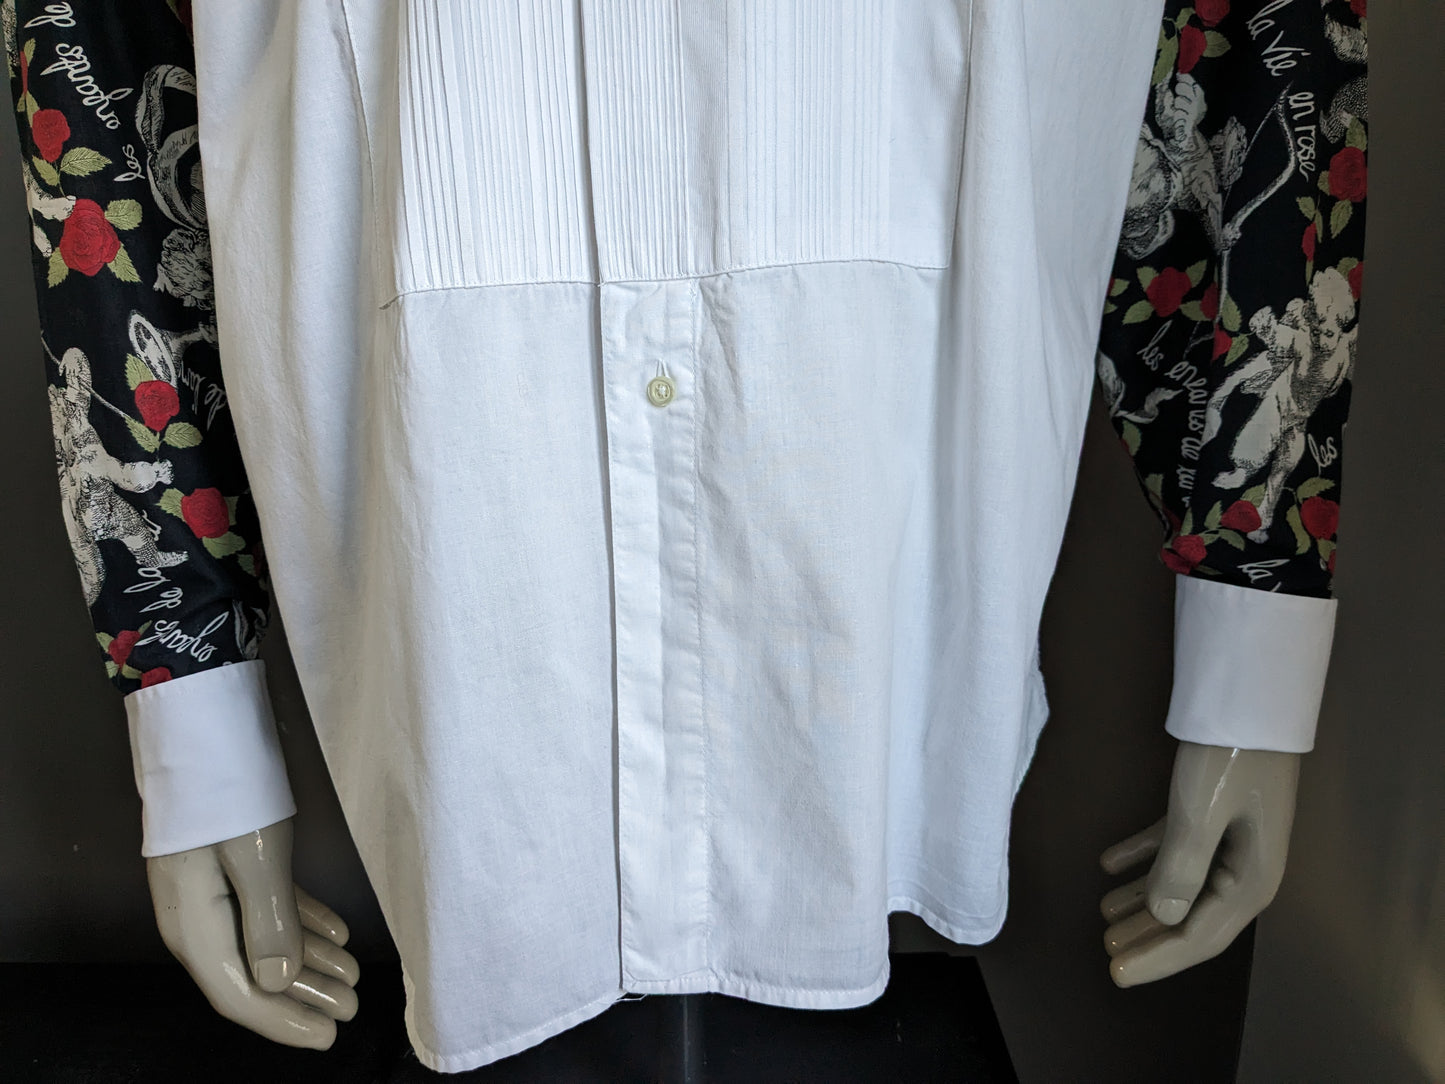 Vintage Moss Bross Shirt. White rouches and sleeves with angels and rose print. Type of cuff knot. Size 2XL.